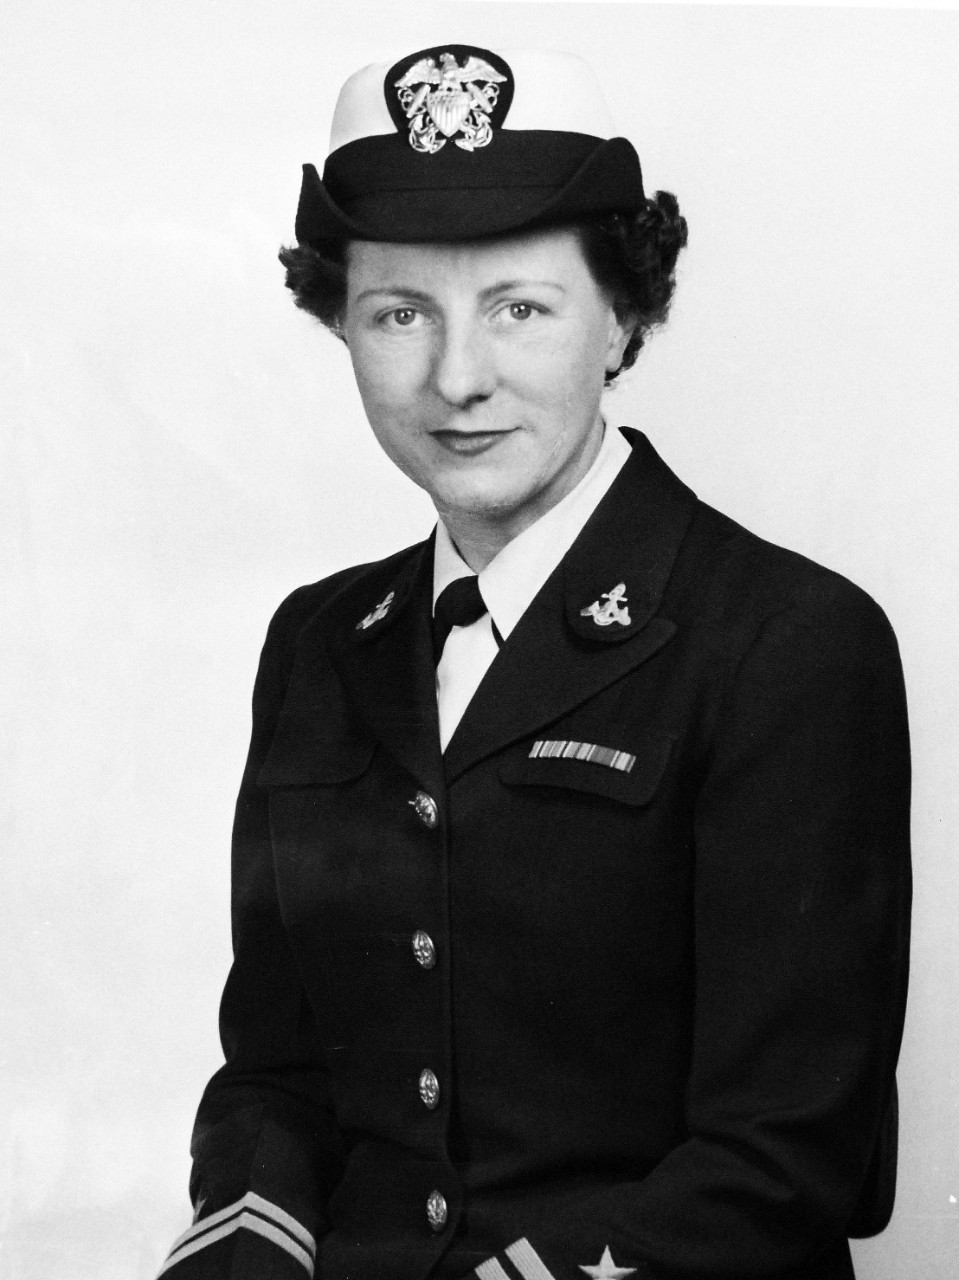 USN 706741:  U.S, Navy Assigns first WAVE to post in Naples, Italy, October 1952.  Lieutenant Dorothy M. Hagen, USN, served at Commander in Chief, Allied Forces, Southern Europe, for duties in transportation at Naples, Italy.  She was the first WAVE to serve at that location.  Photograph released October 22, 1952.   Official U.S. Navy photograph, now in the collections of the National Archives.  